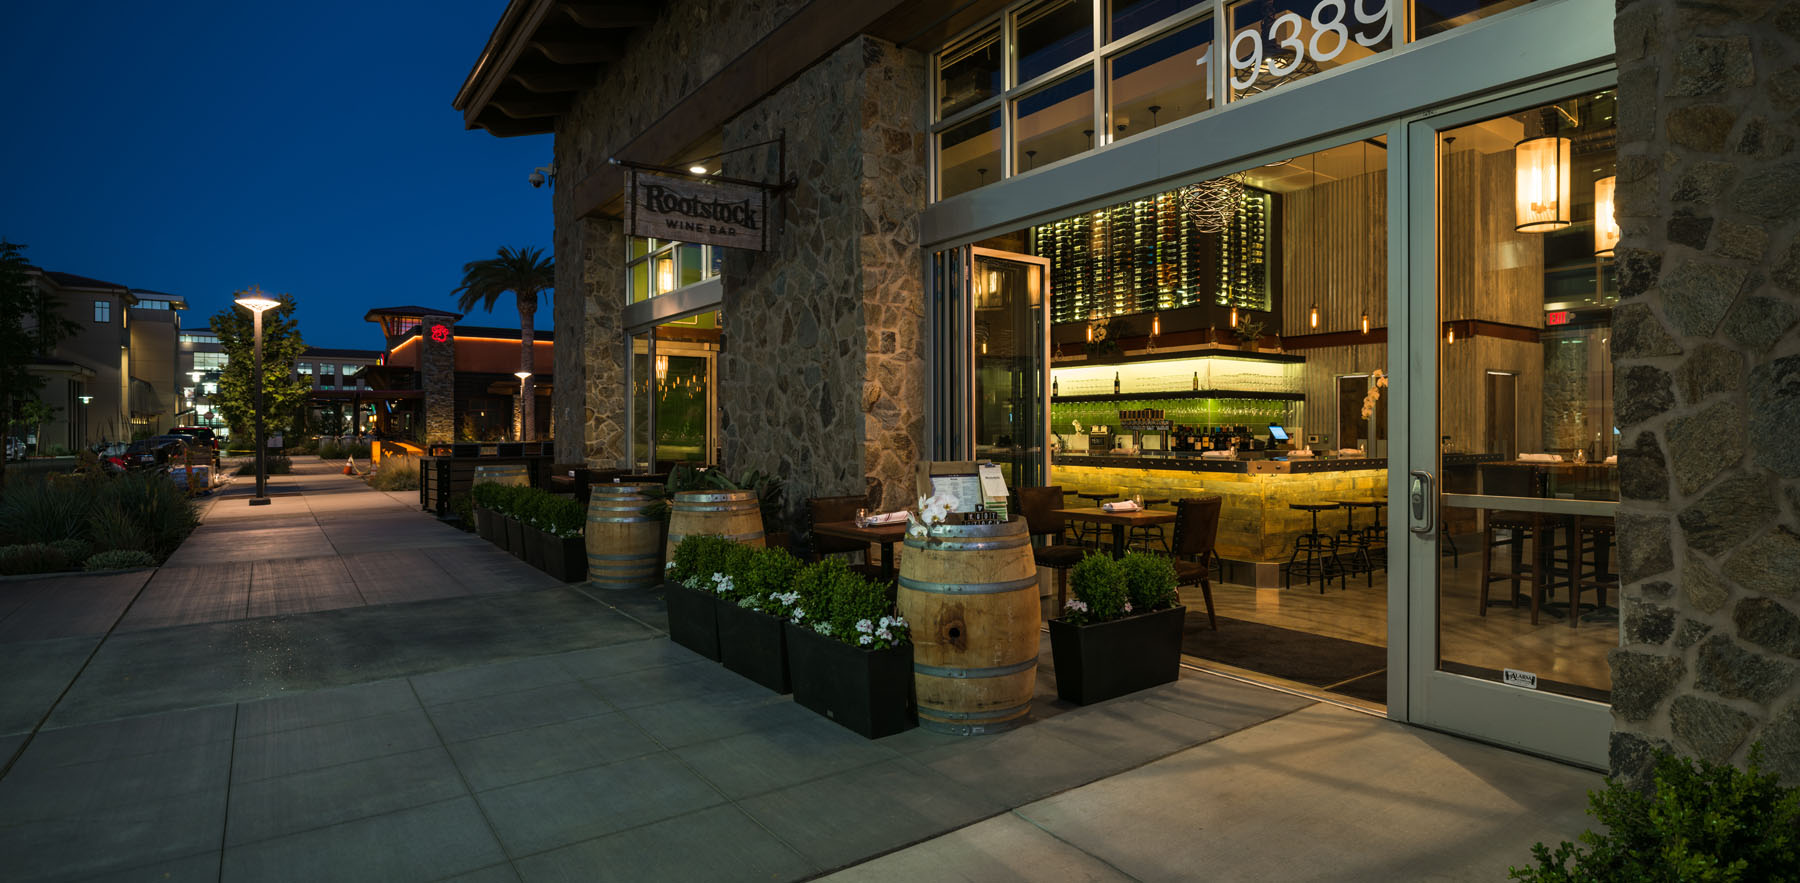 Cupertino Architecture Interior / Exterior Photography at Night - by Bay Area commercial photographer Chris Schmauch